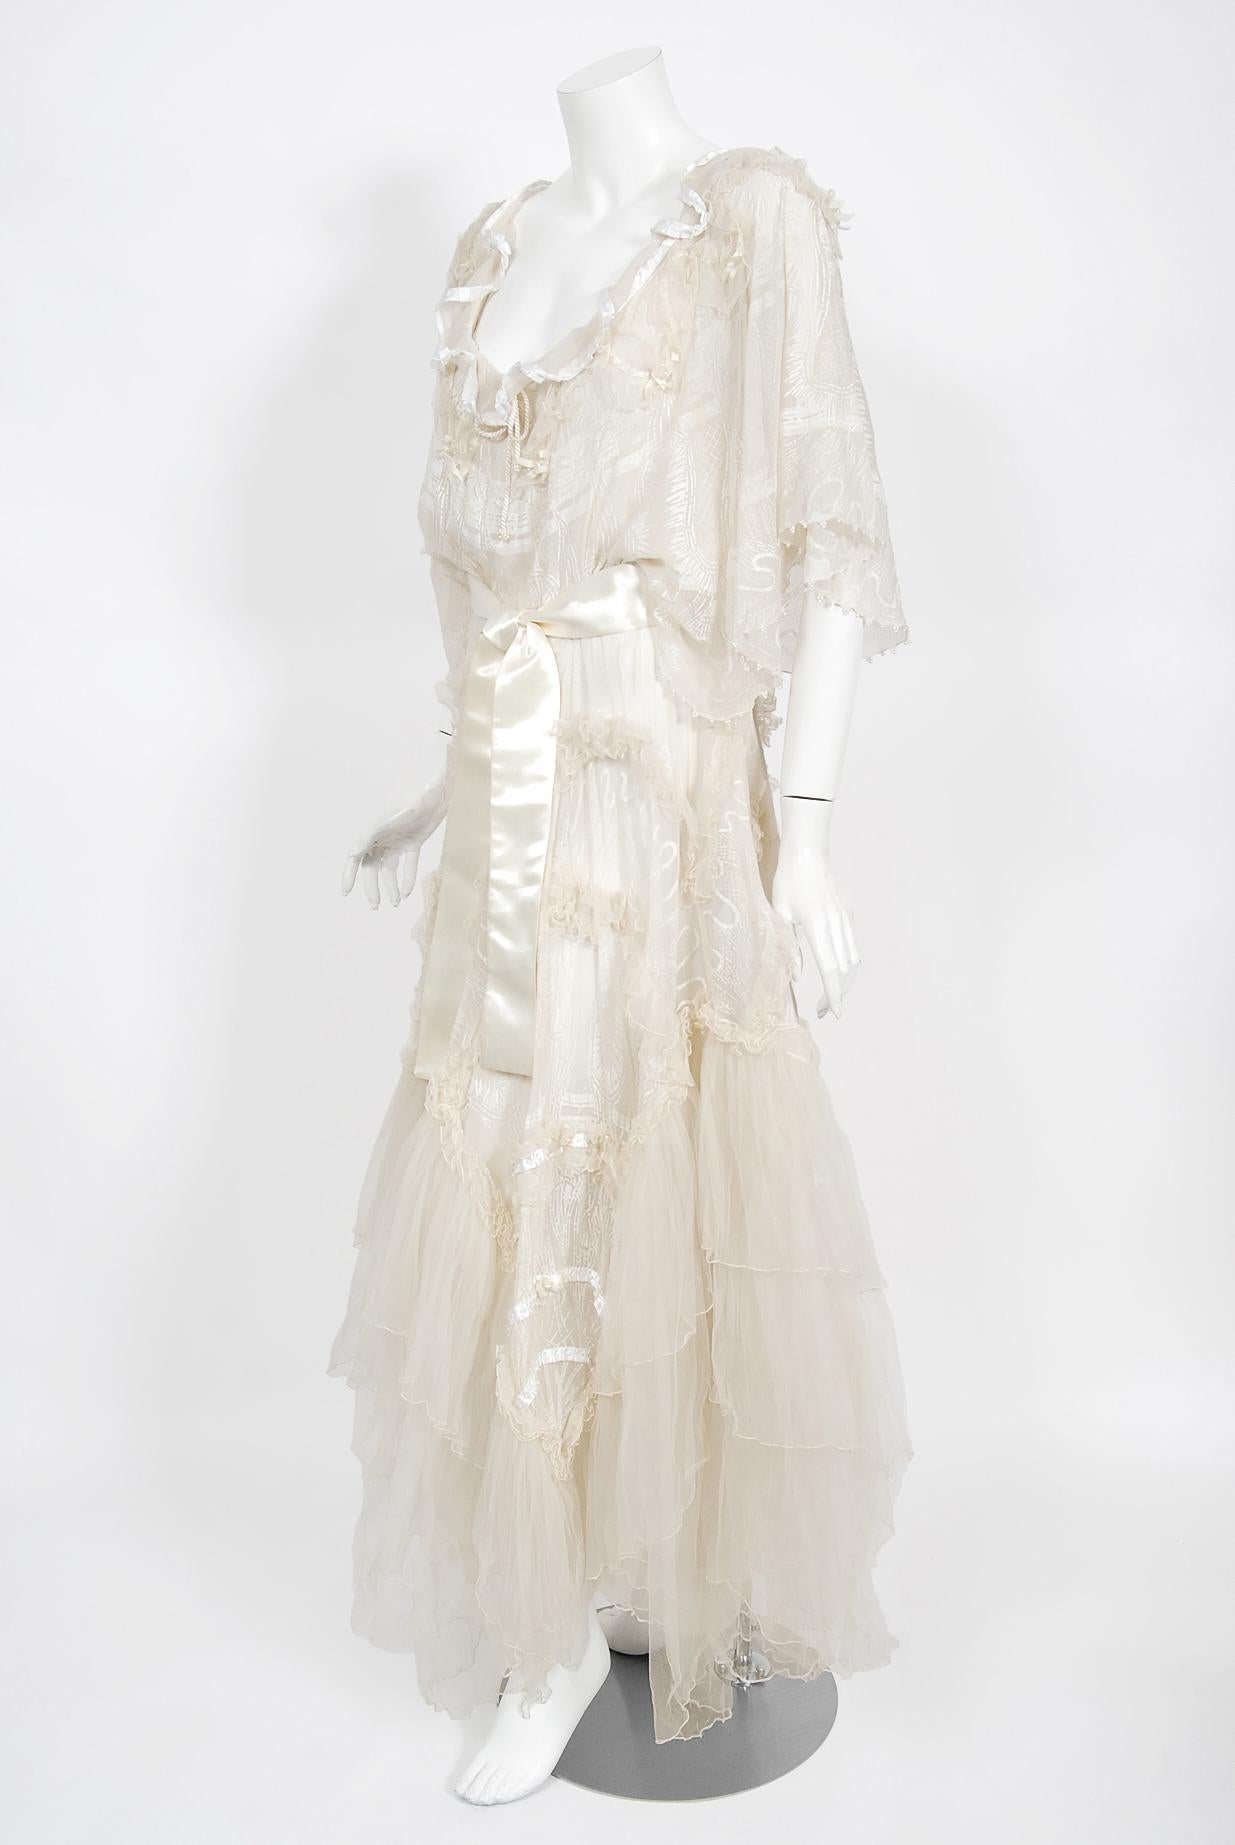 Women's Vintage 1973 Zandra Rhodes Couture Hand Painted Ivory Sheer Chiffon & Tulle Gown